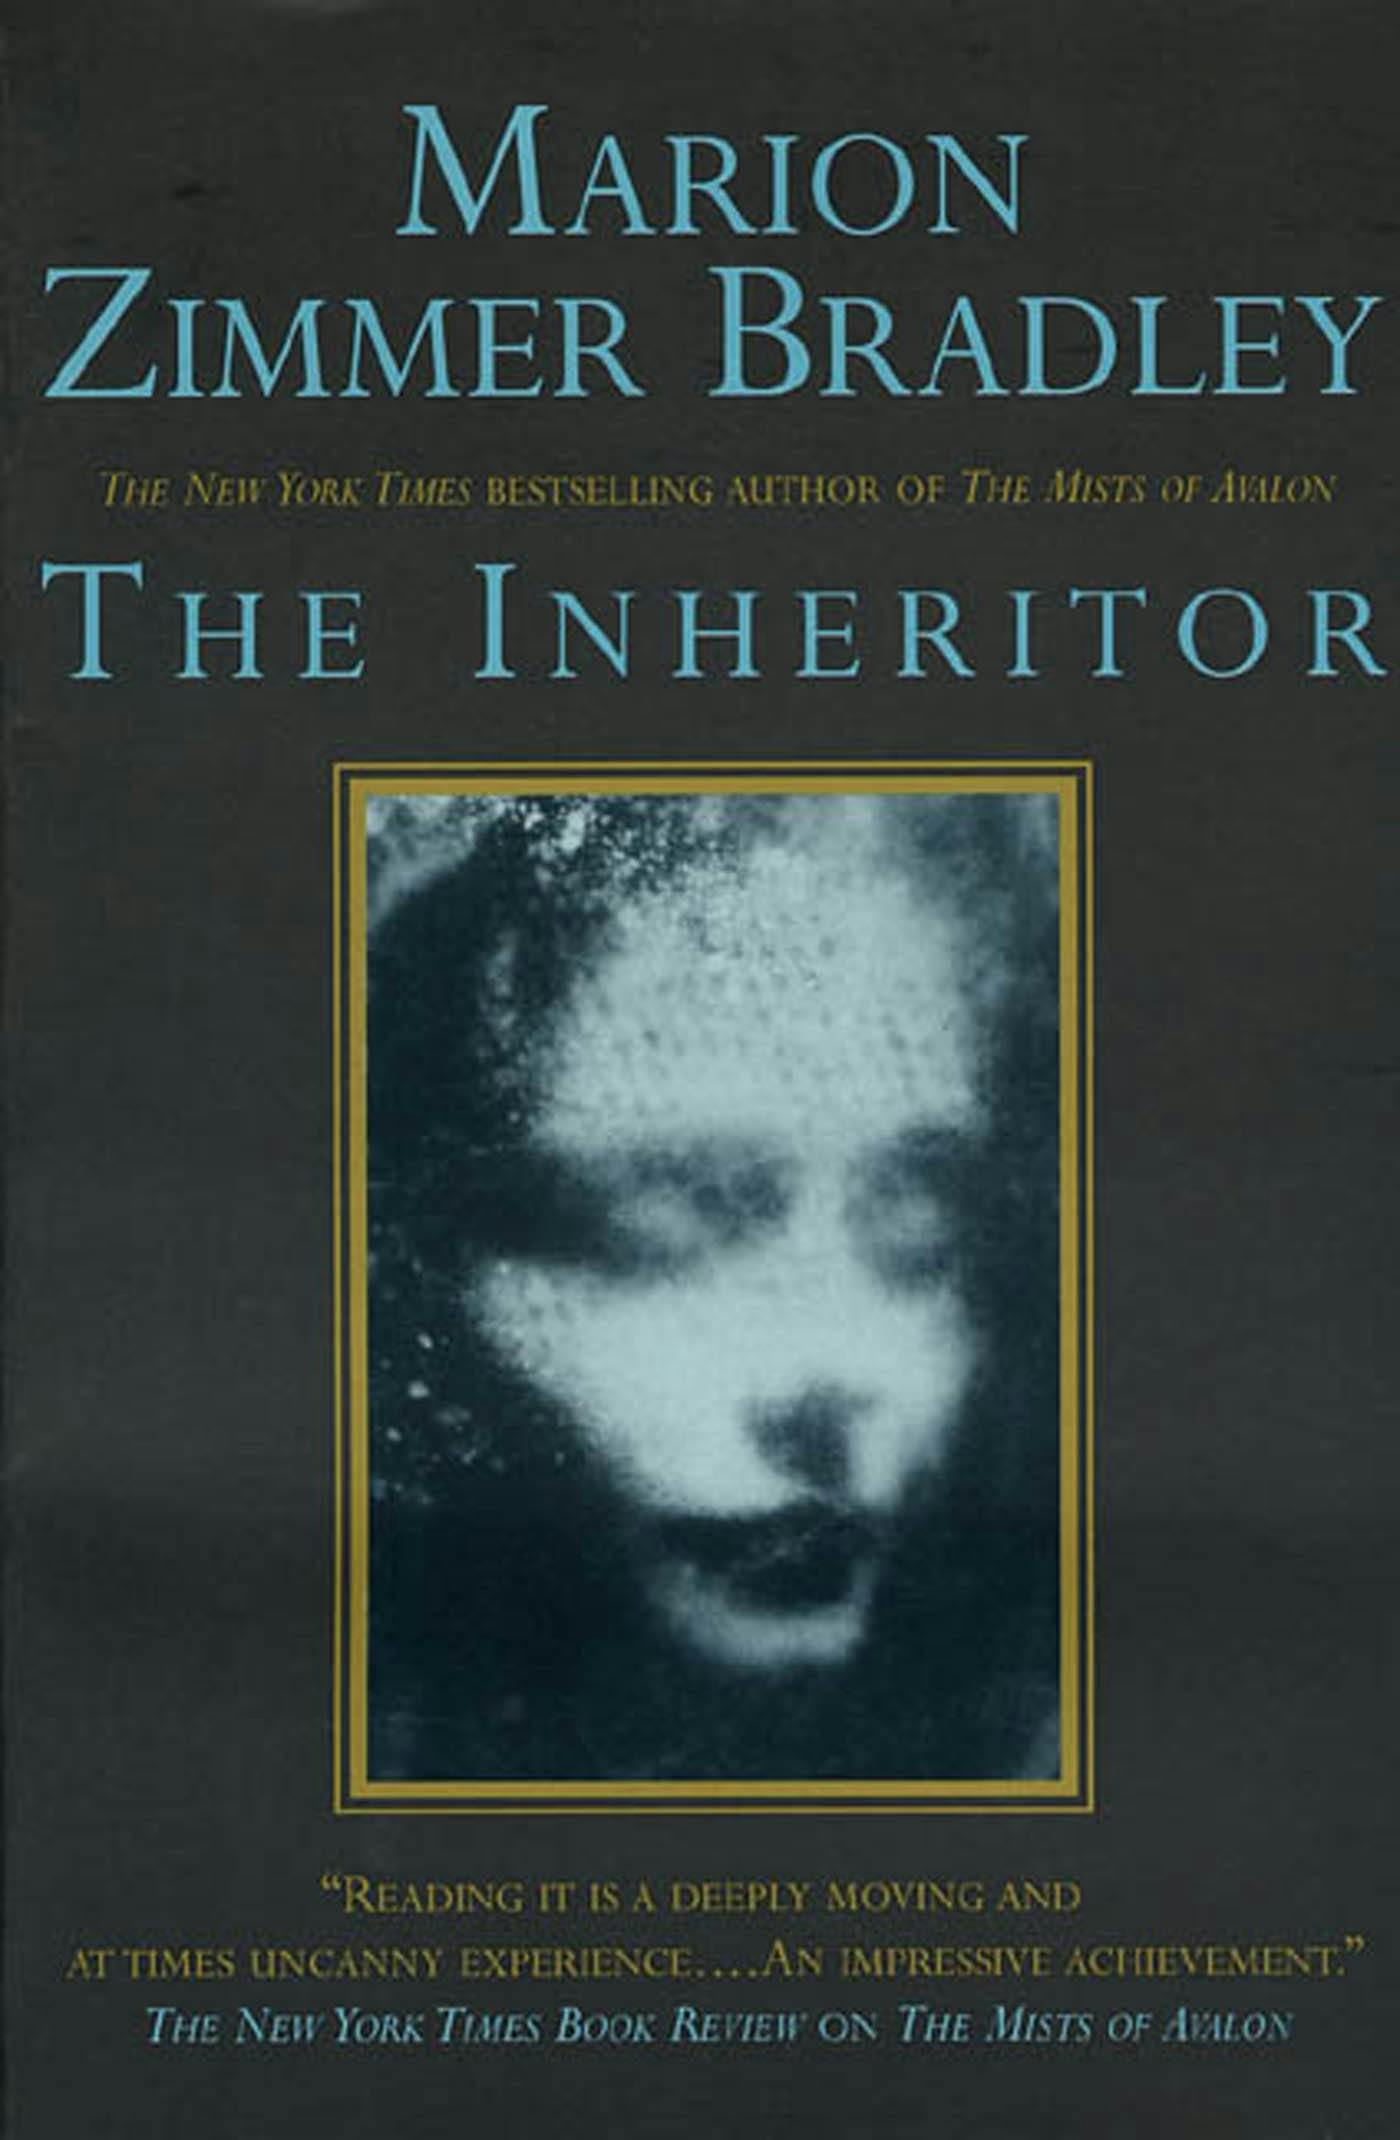 Cover for the book titled as: The Inheritor